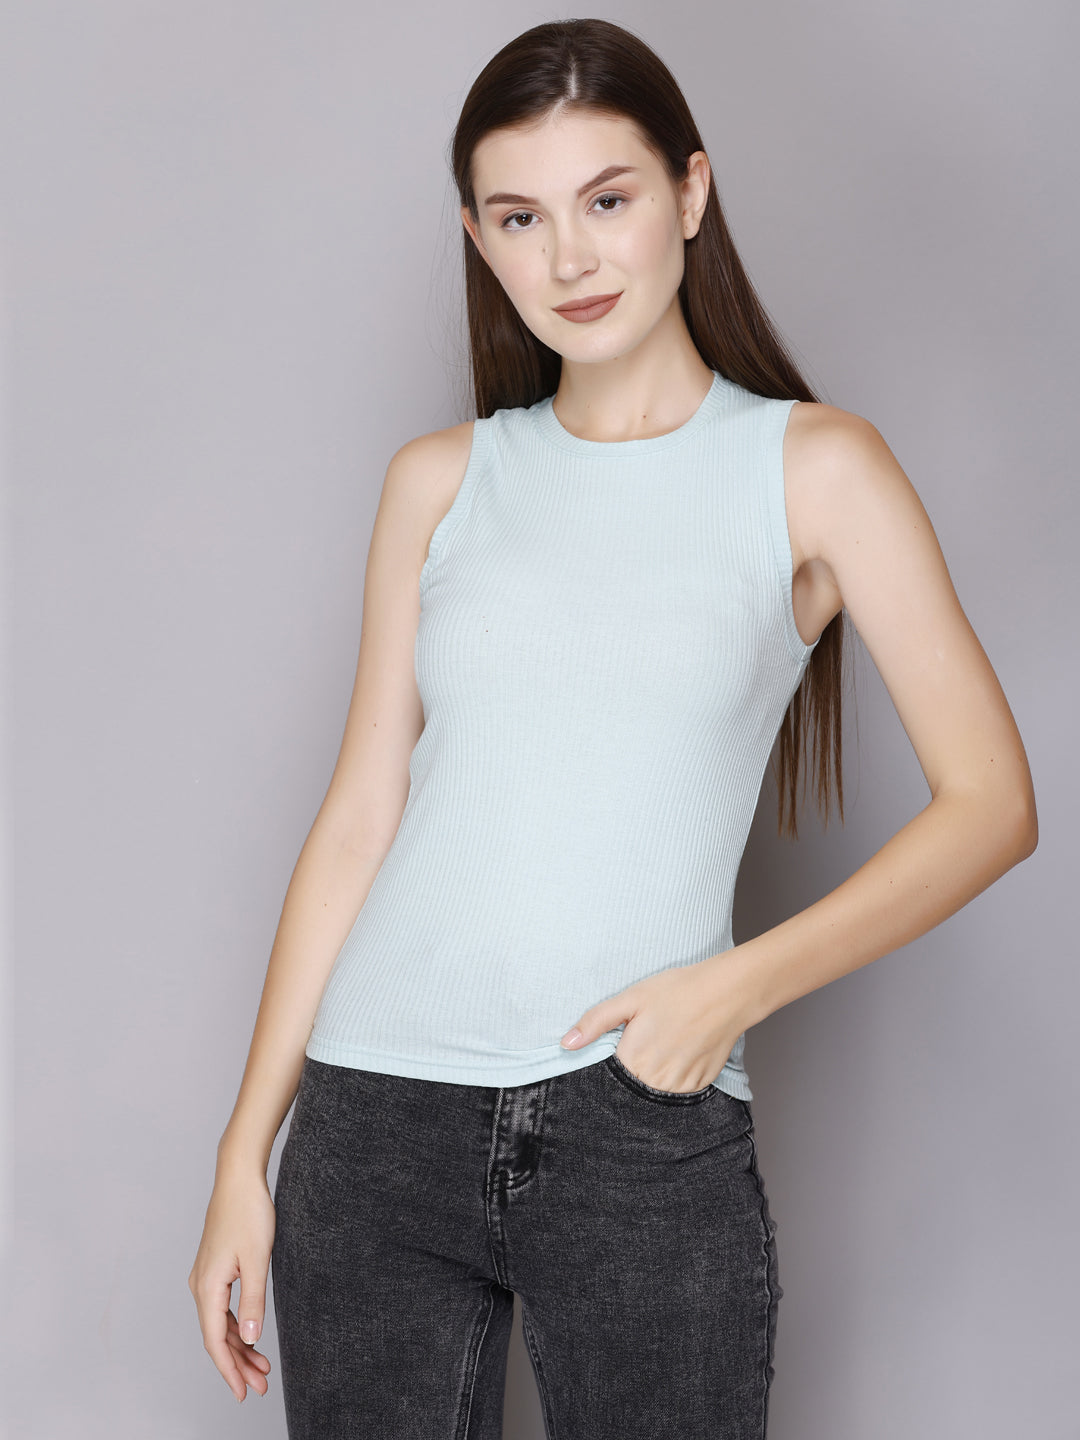 Stylish Modish Rib Tank Top For Women/ Girls Online At Best Prices